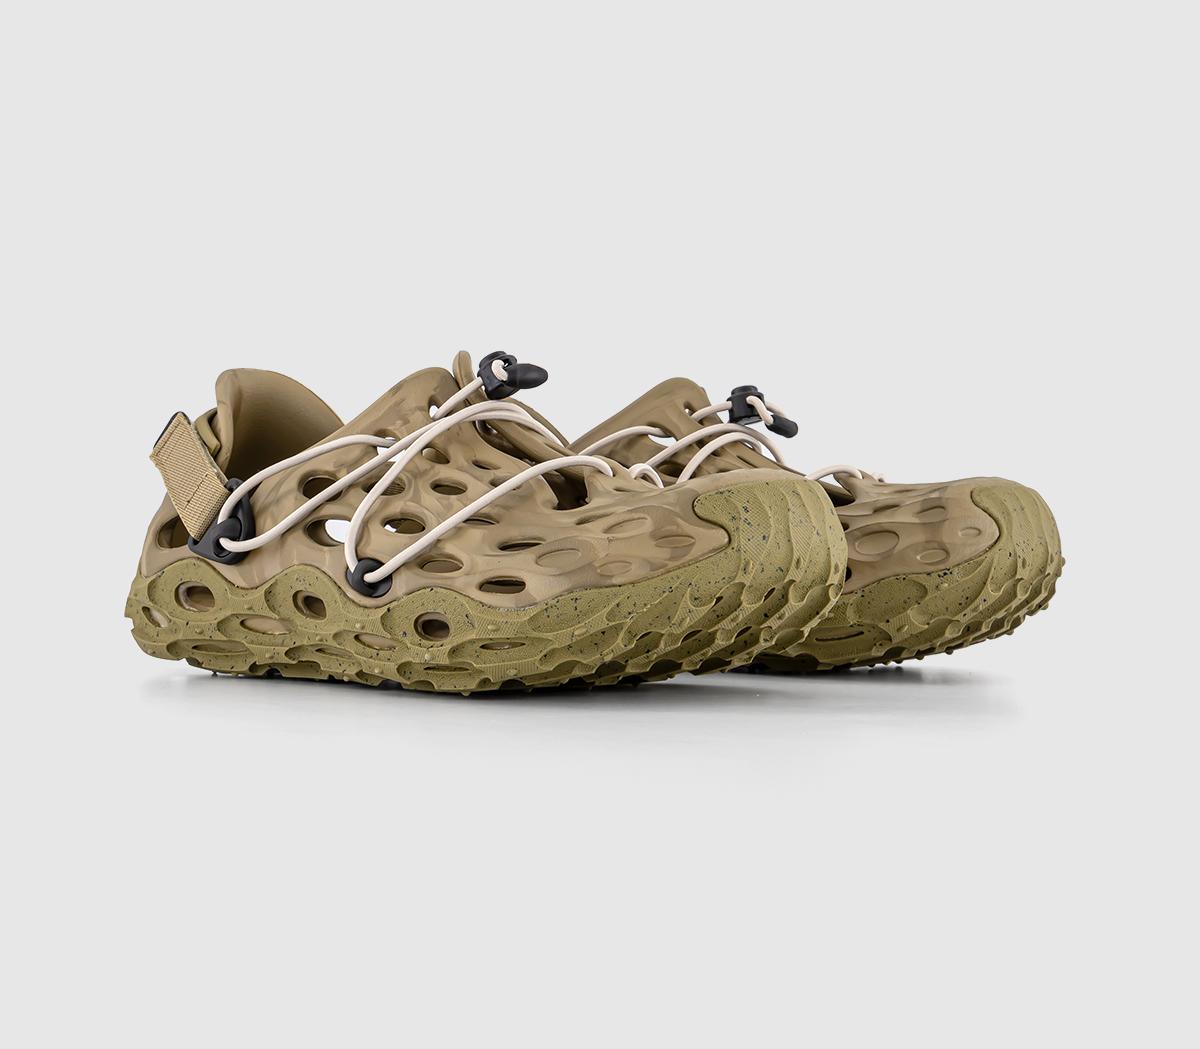 Merrell Hydro Moc At Cage 1trl Shoes Coyote - Men's Trainers